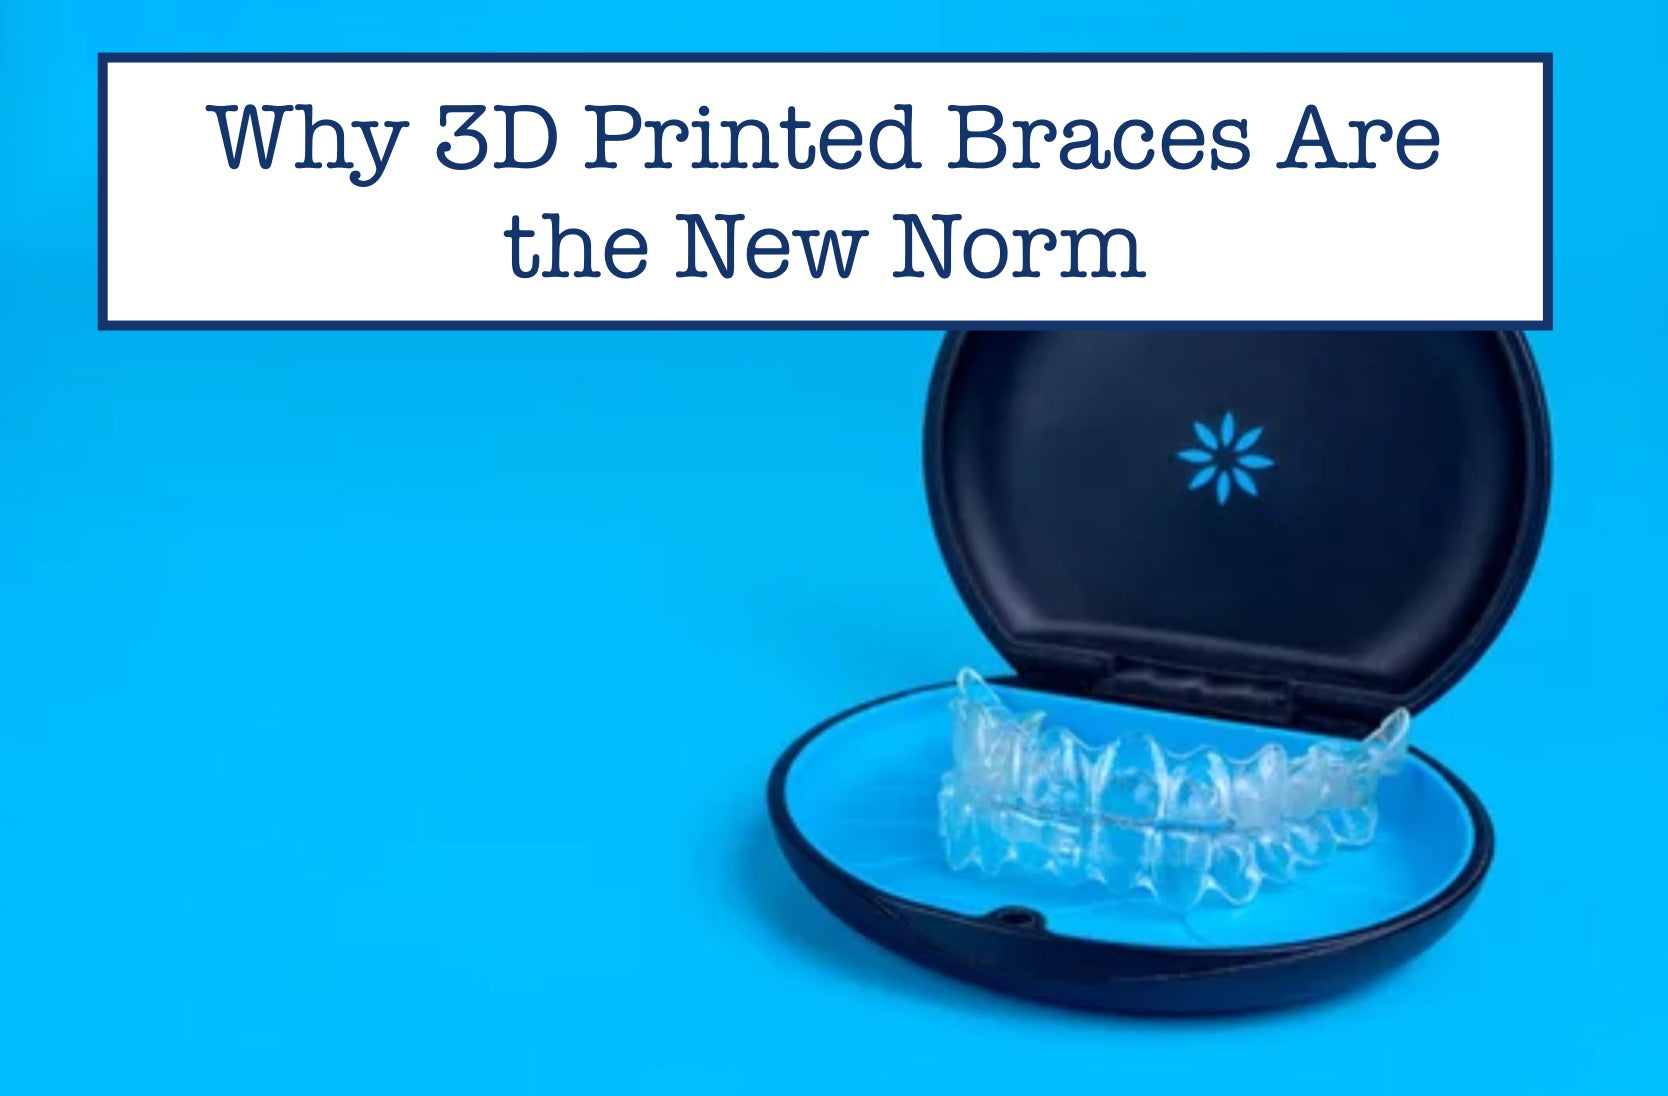 Why 3D Printed Braces Are the New Norm